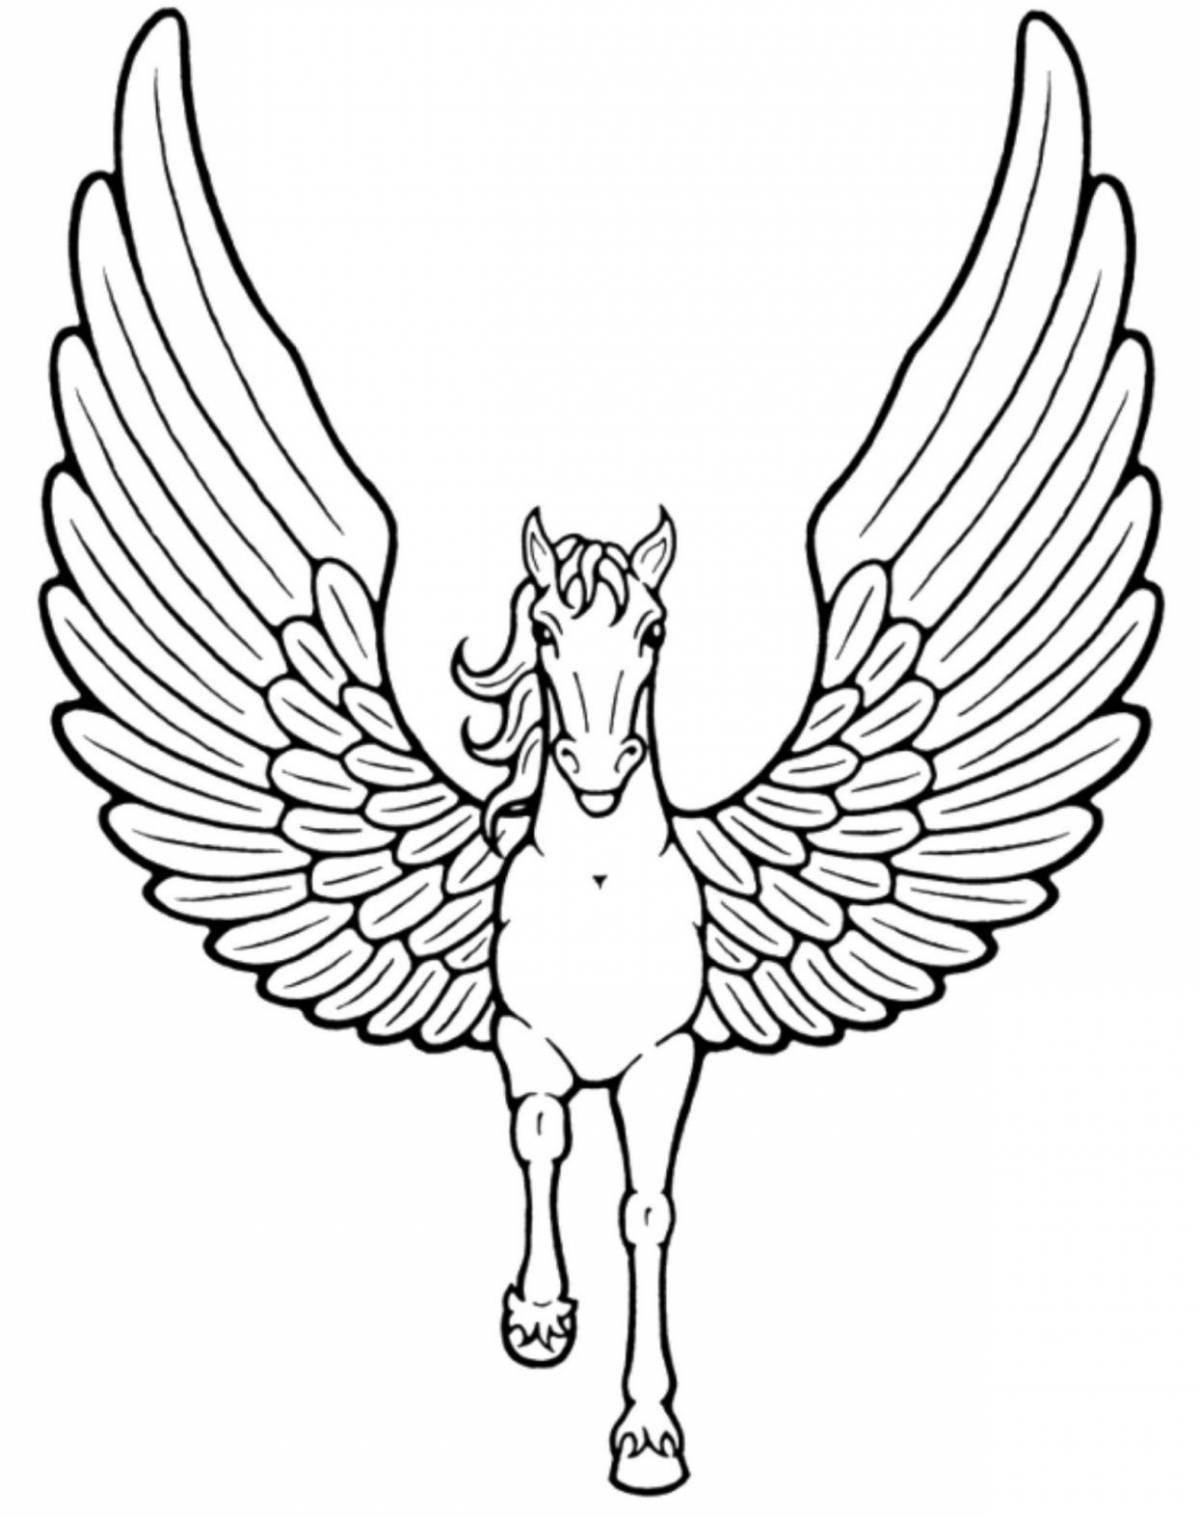 Majestic unicorn with wings coloring book for kids